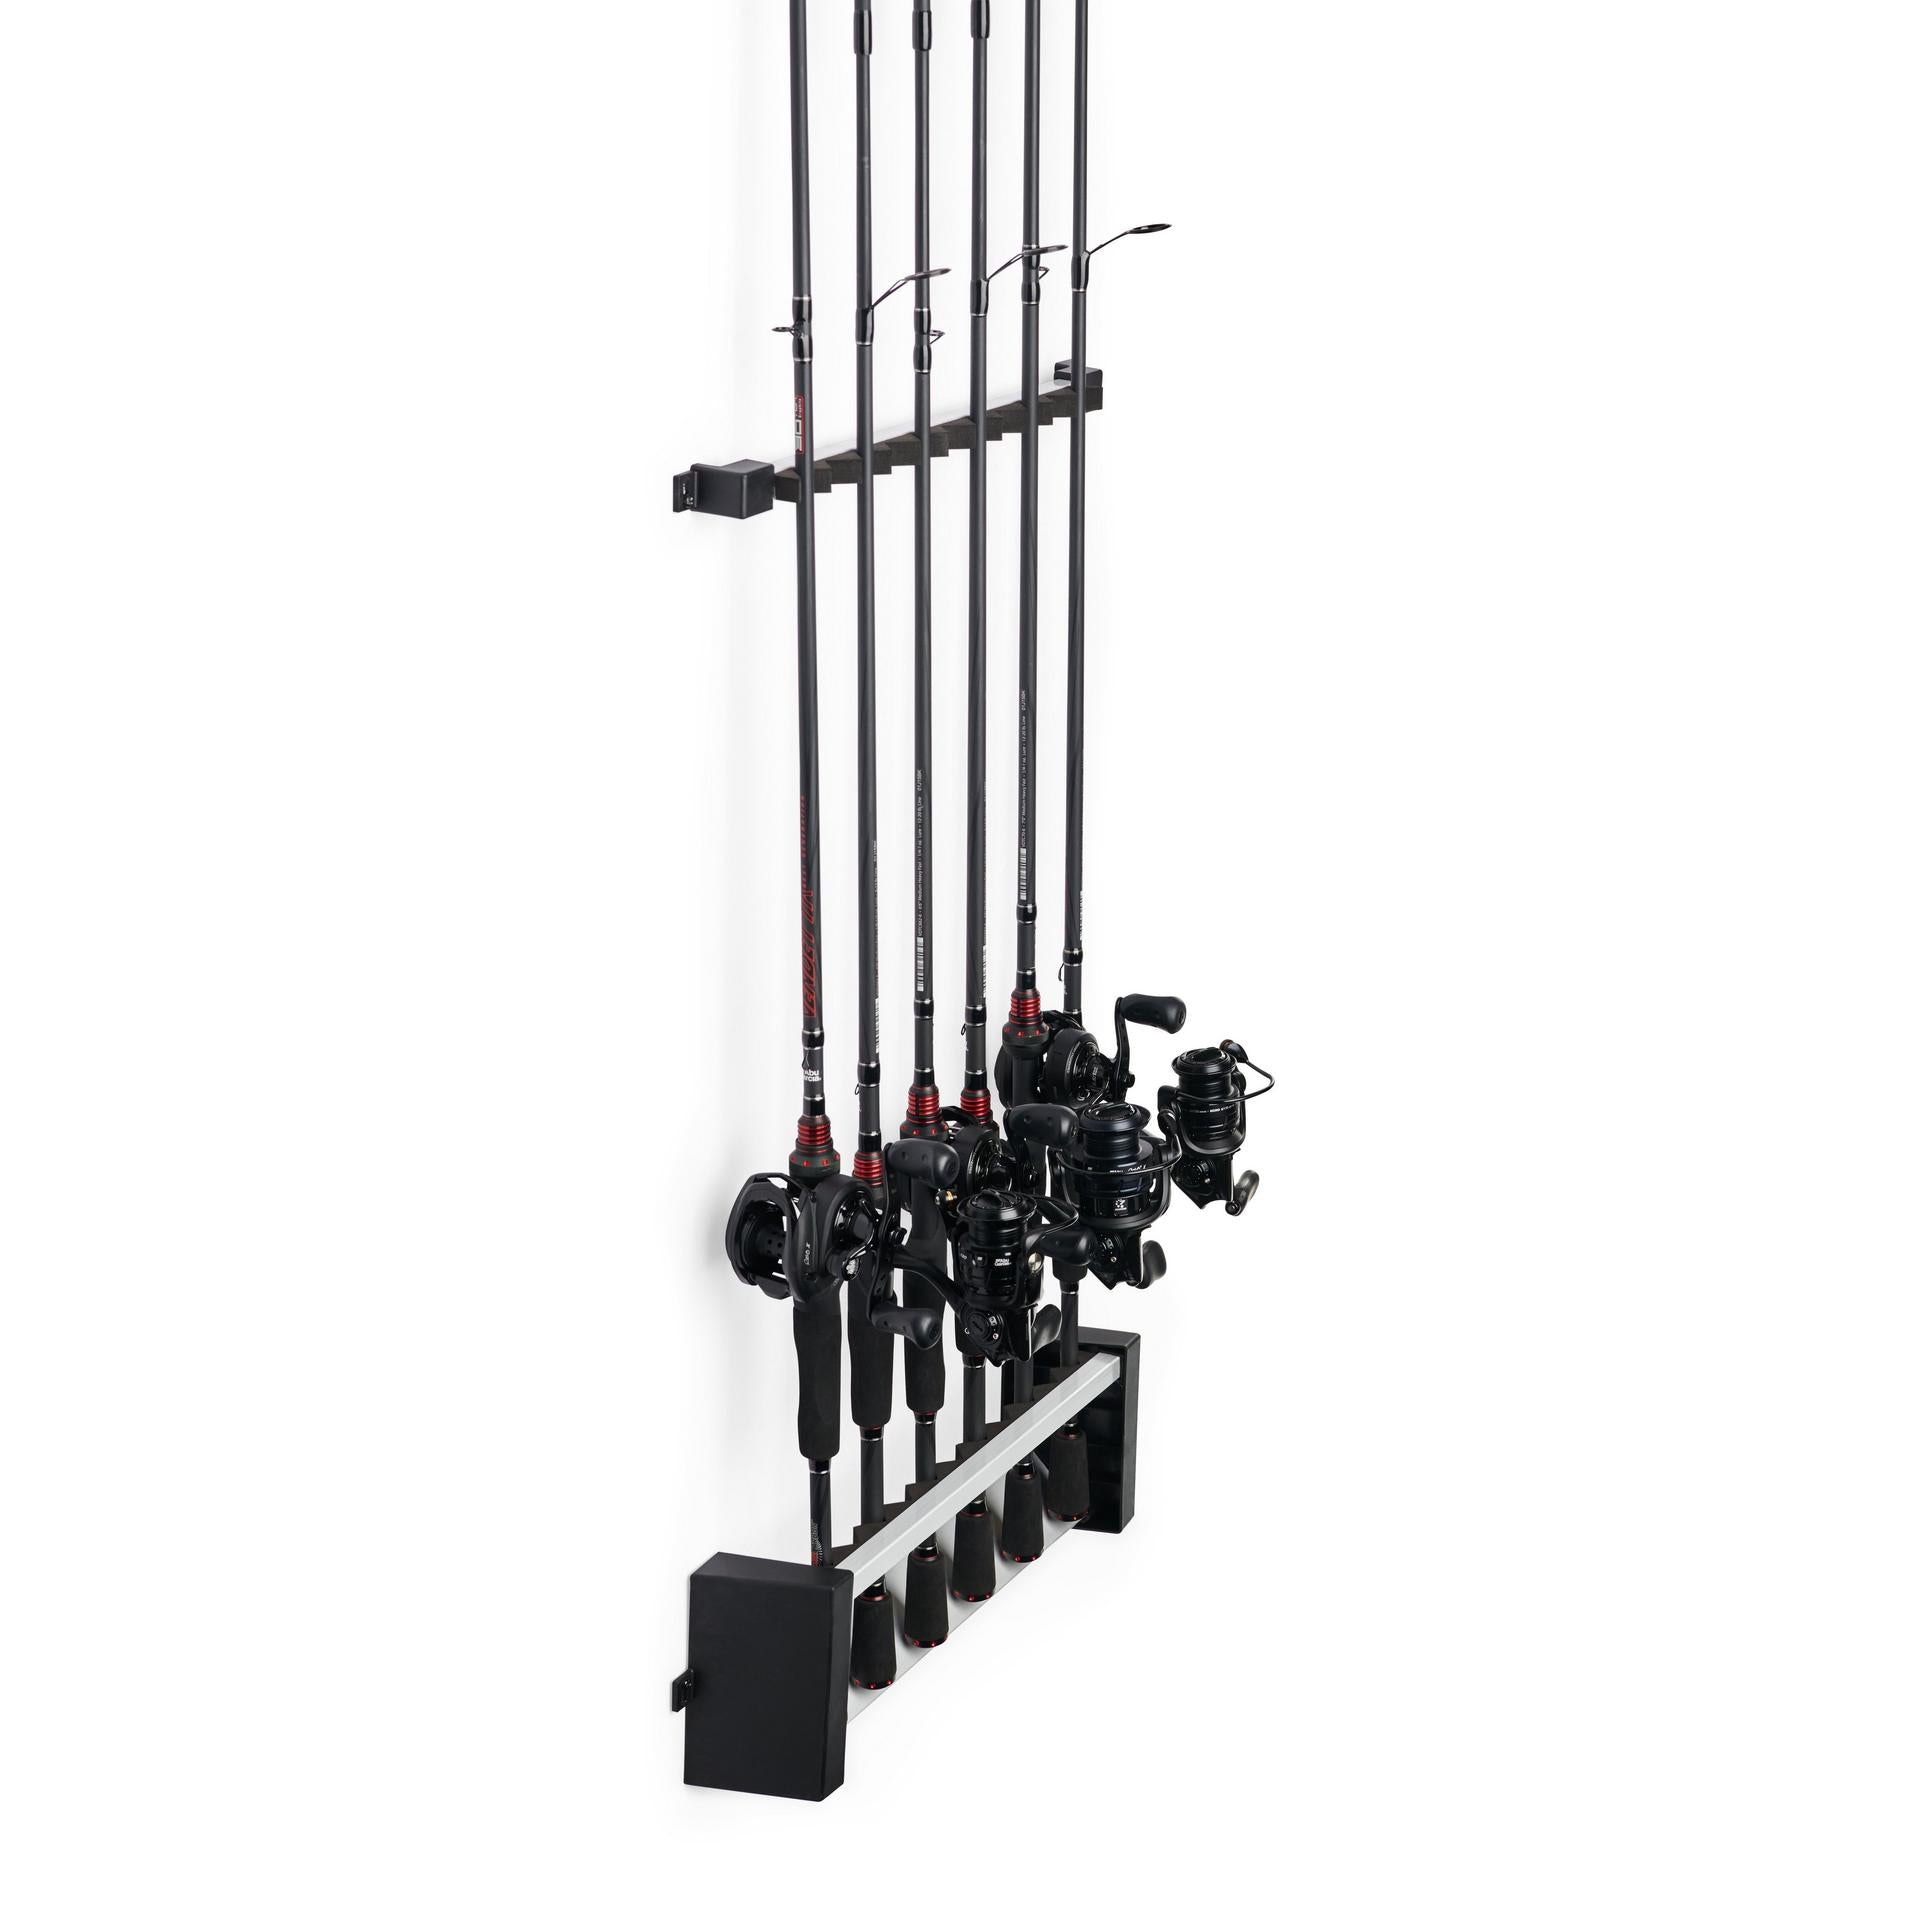 Maple Fishing Rod Rack, Wall Mount Pool Cue Holder, Father's Day Gift for  Fisherman, Outdoorsman, Built in Home Decor 4 Fishing Cabin, Lodge -   Canada